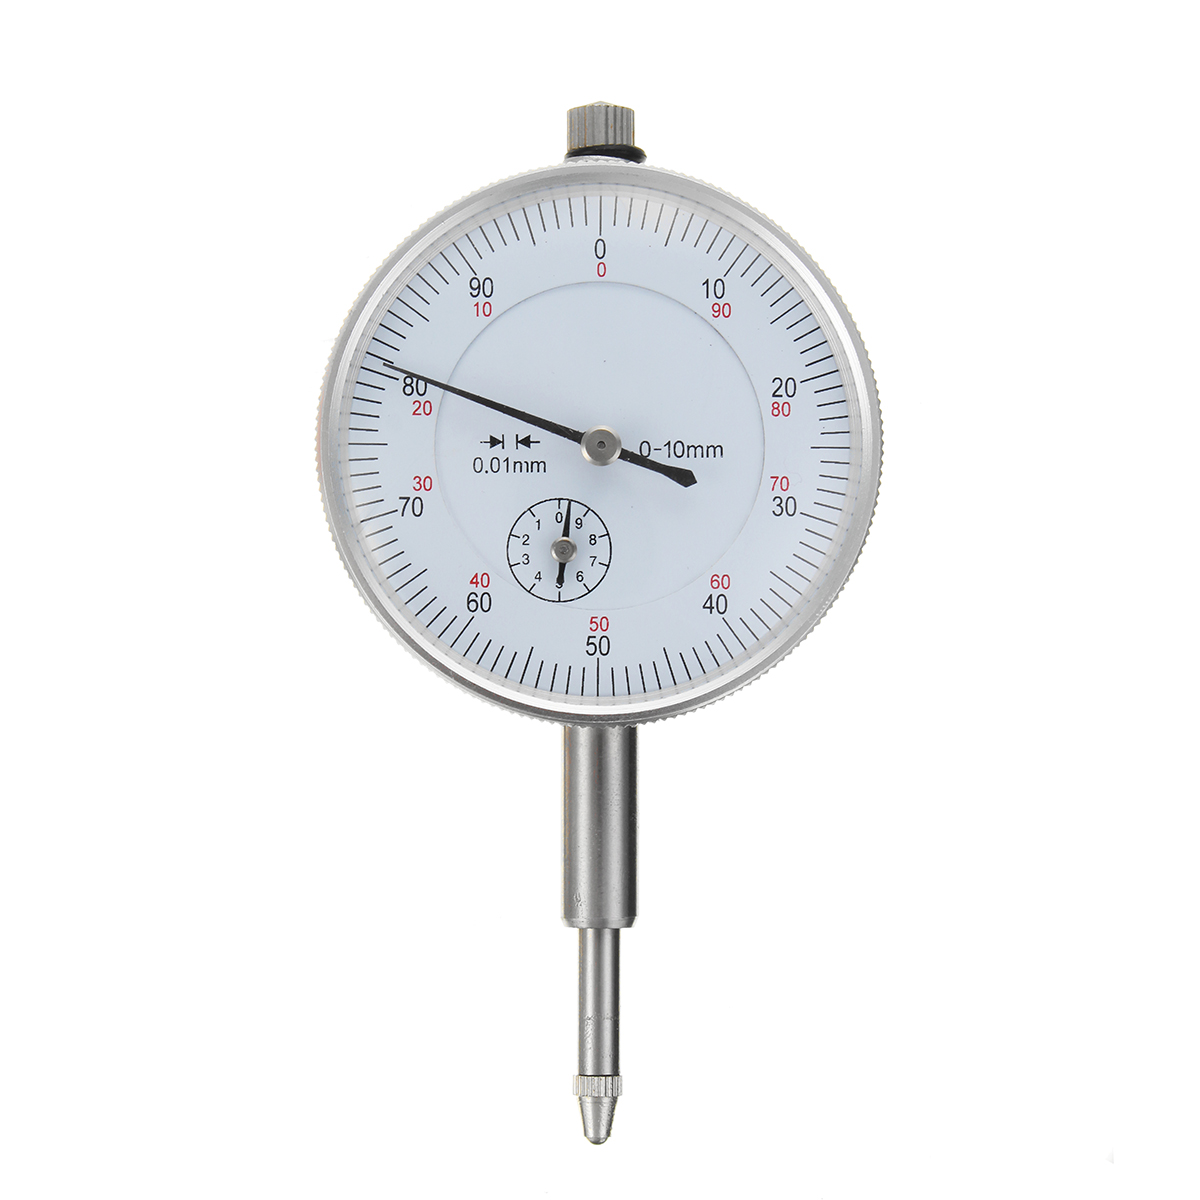 50-160mm001mm-Metric-Dial-Bore-Gauge-Cylinder-Internal-Small-Inside-Measuring-Gage-Test-1350544-8